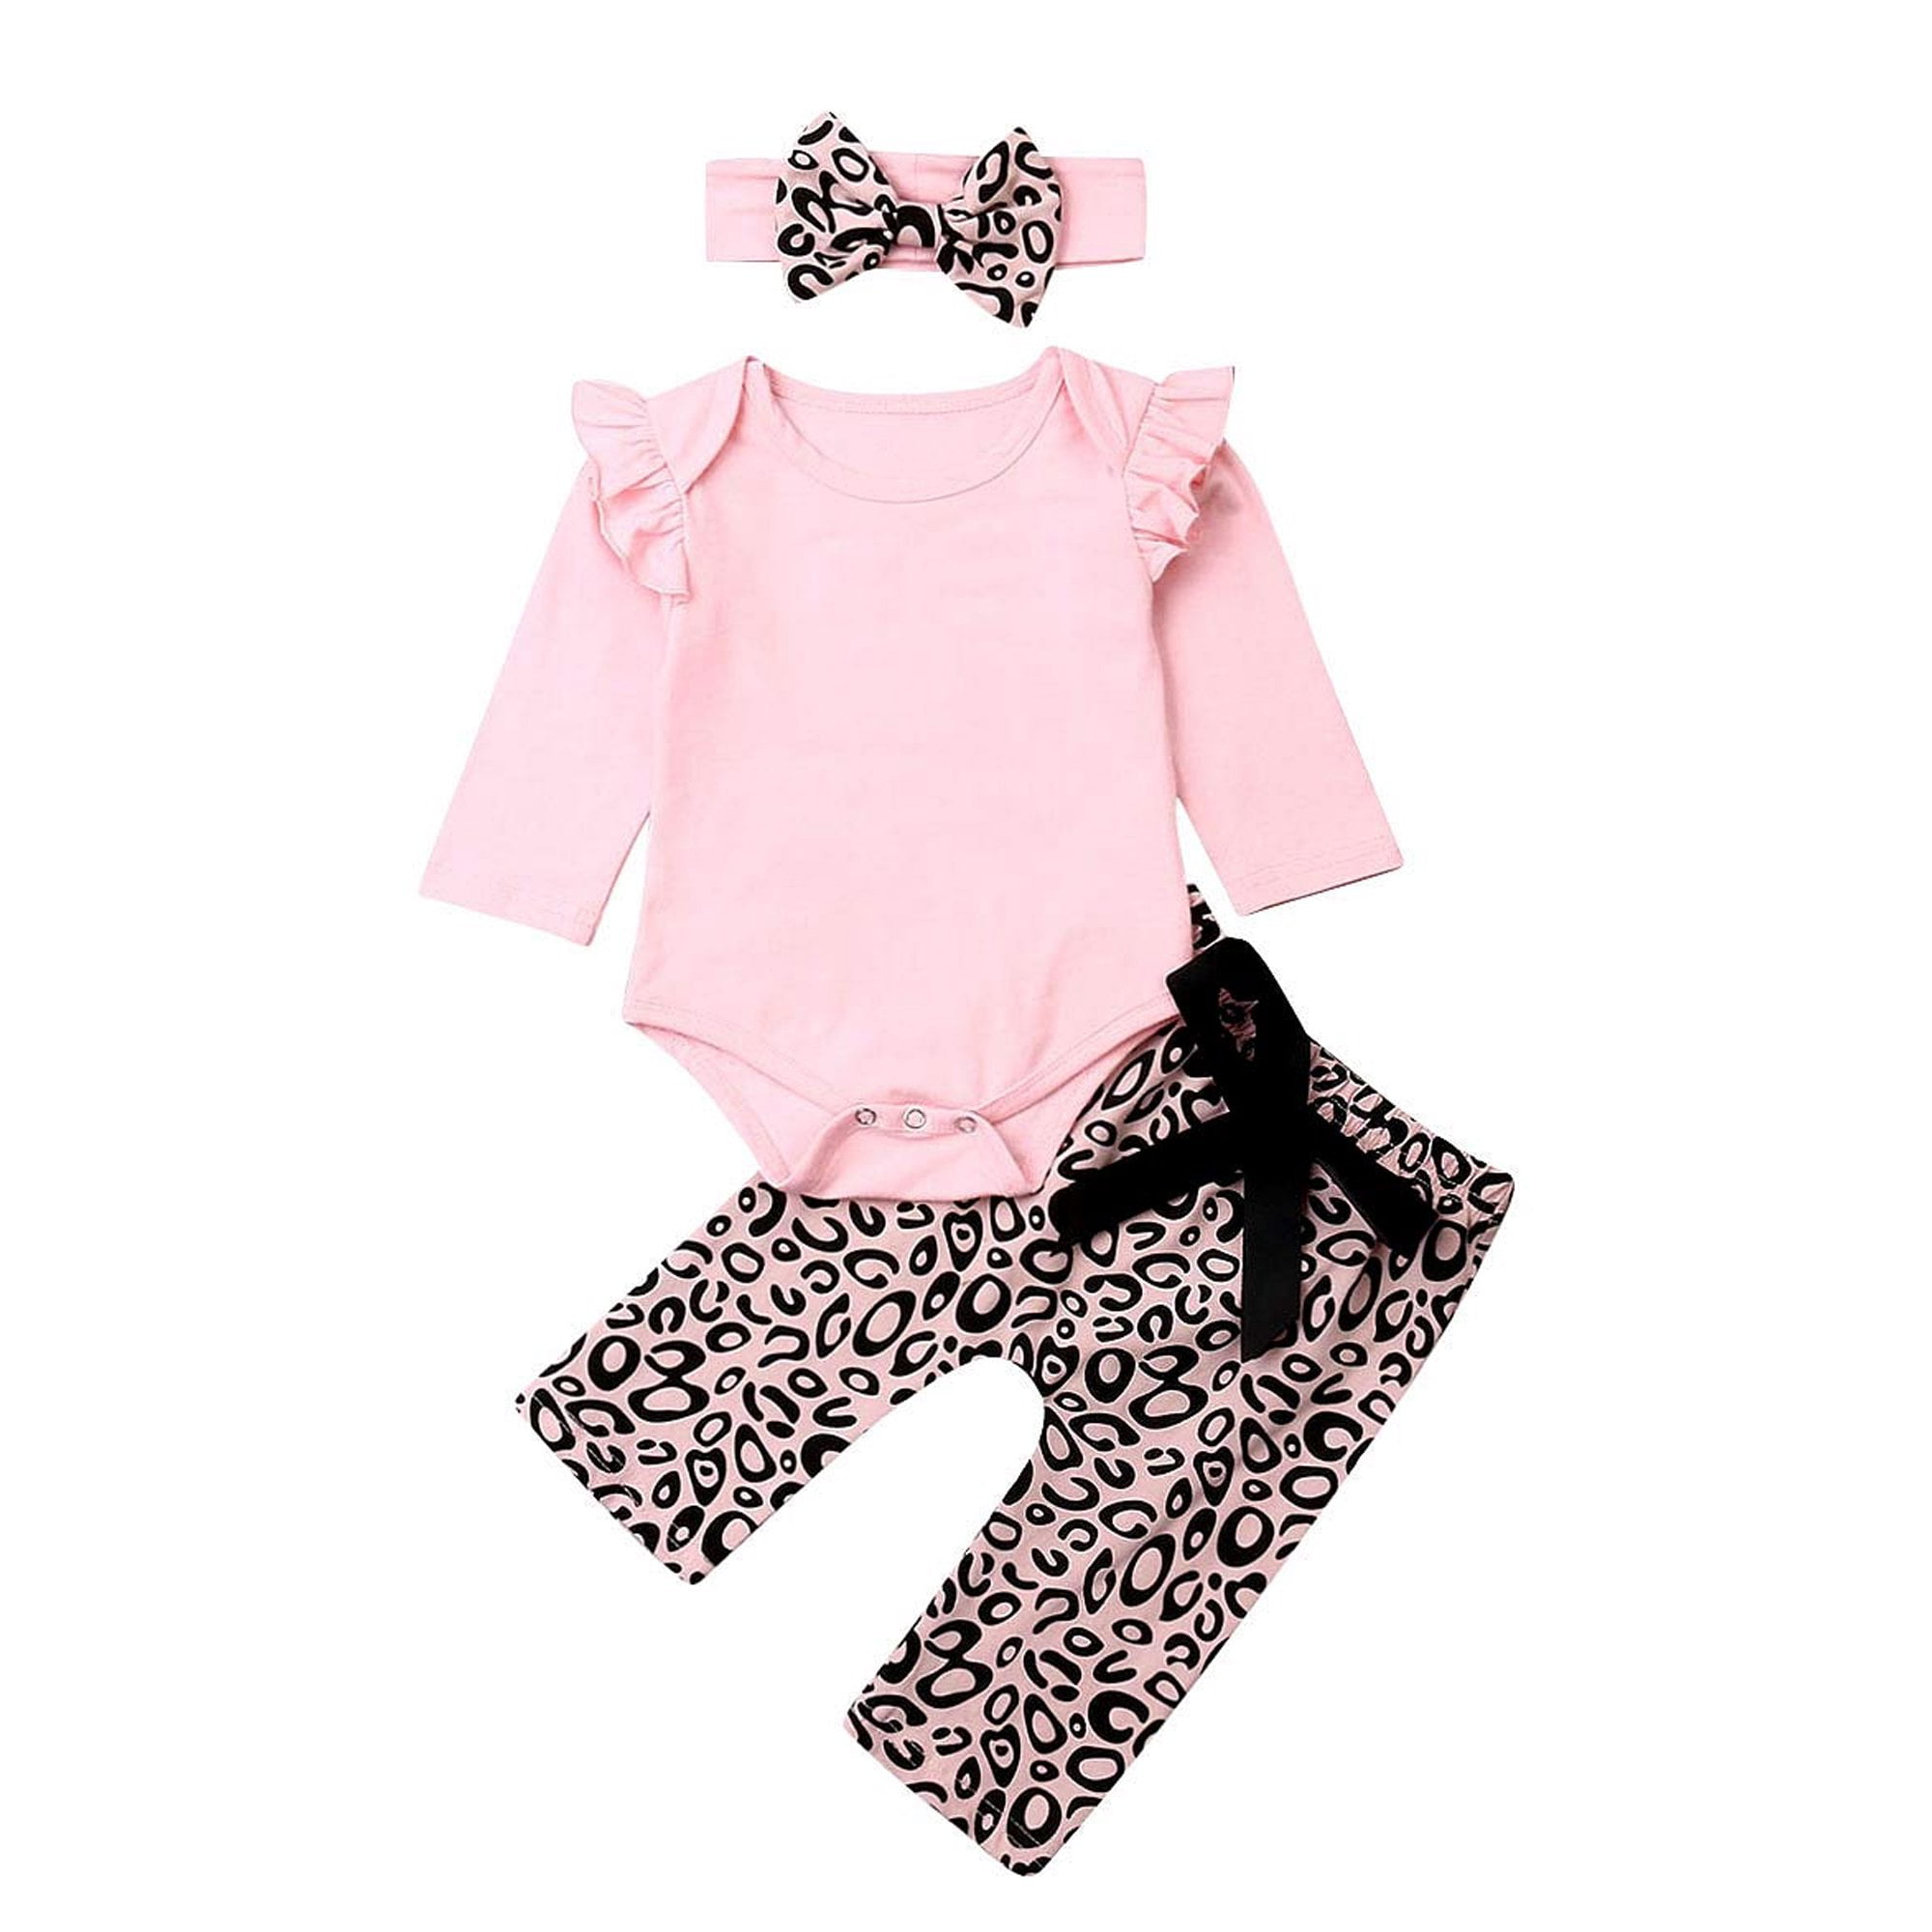 Newborn Toddler Baby Girl Clothes Ruffle Long Sleeve Letter Print Top Floral Halen Pants Headband Hoodie Top Outfits 